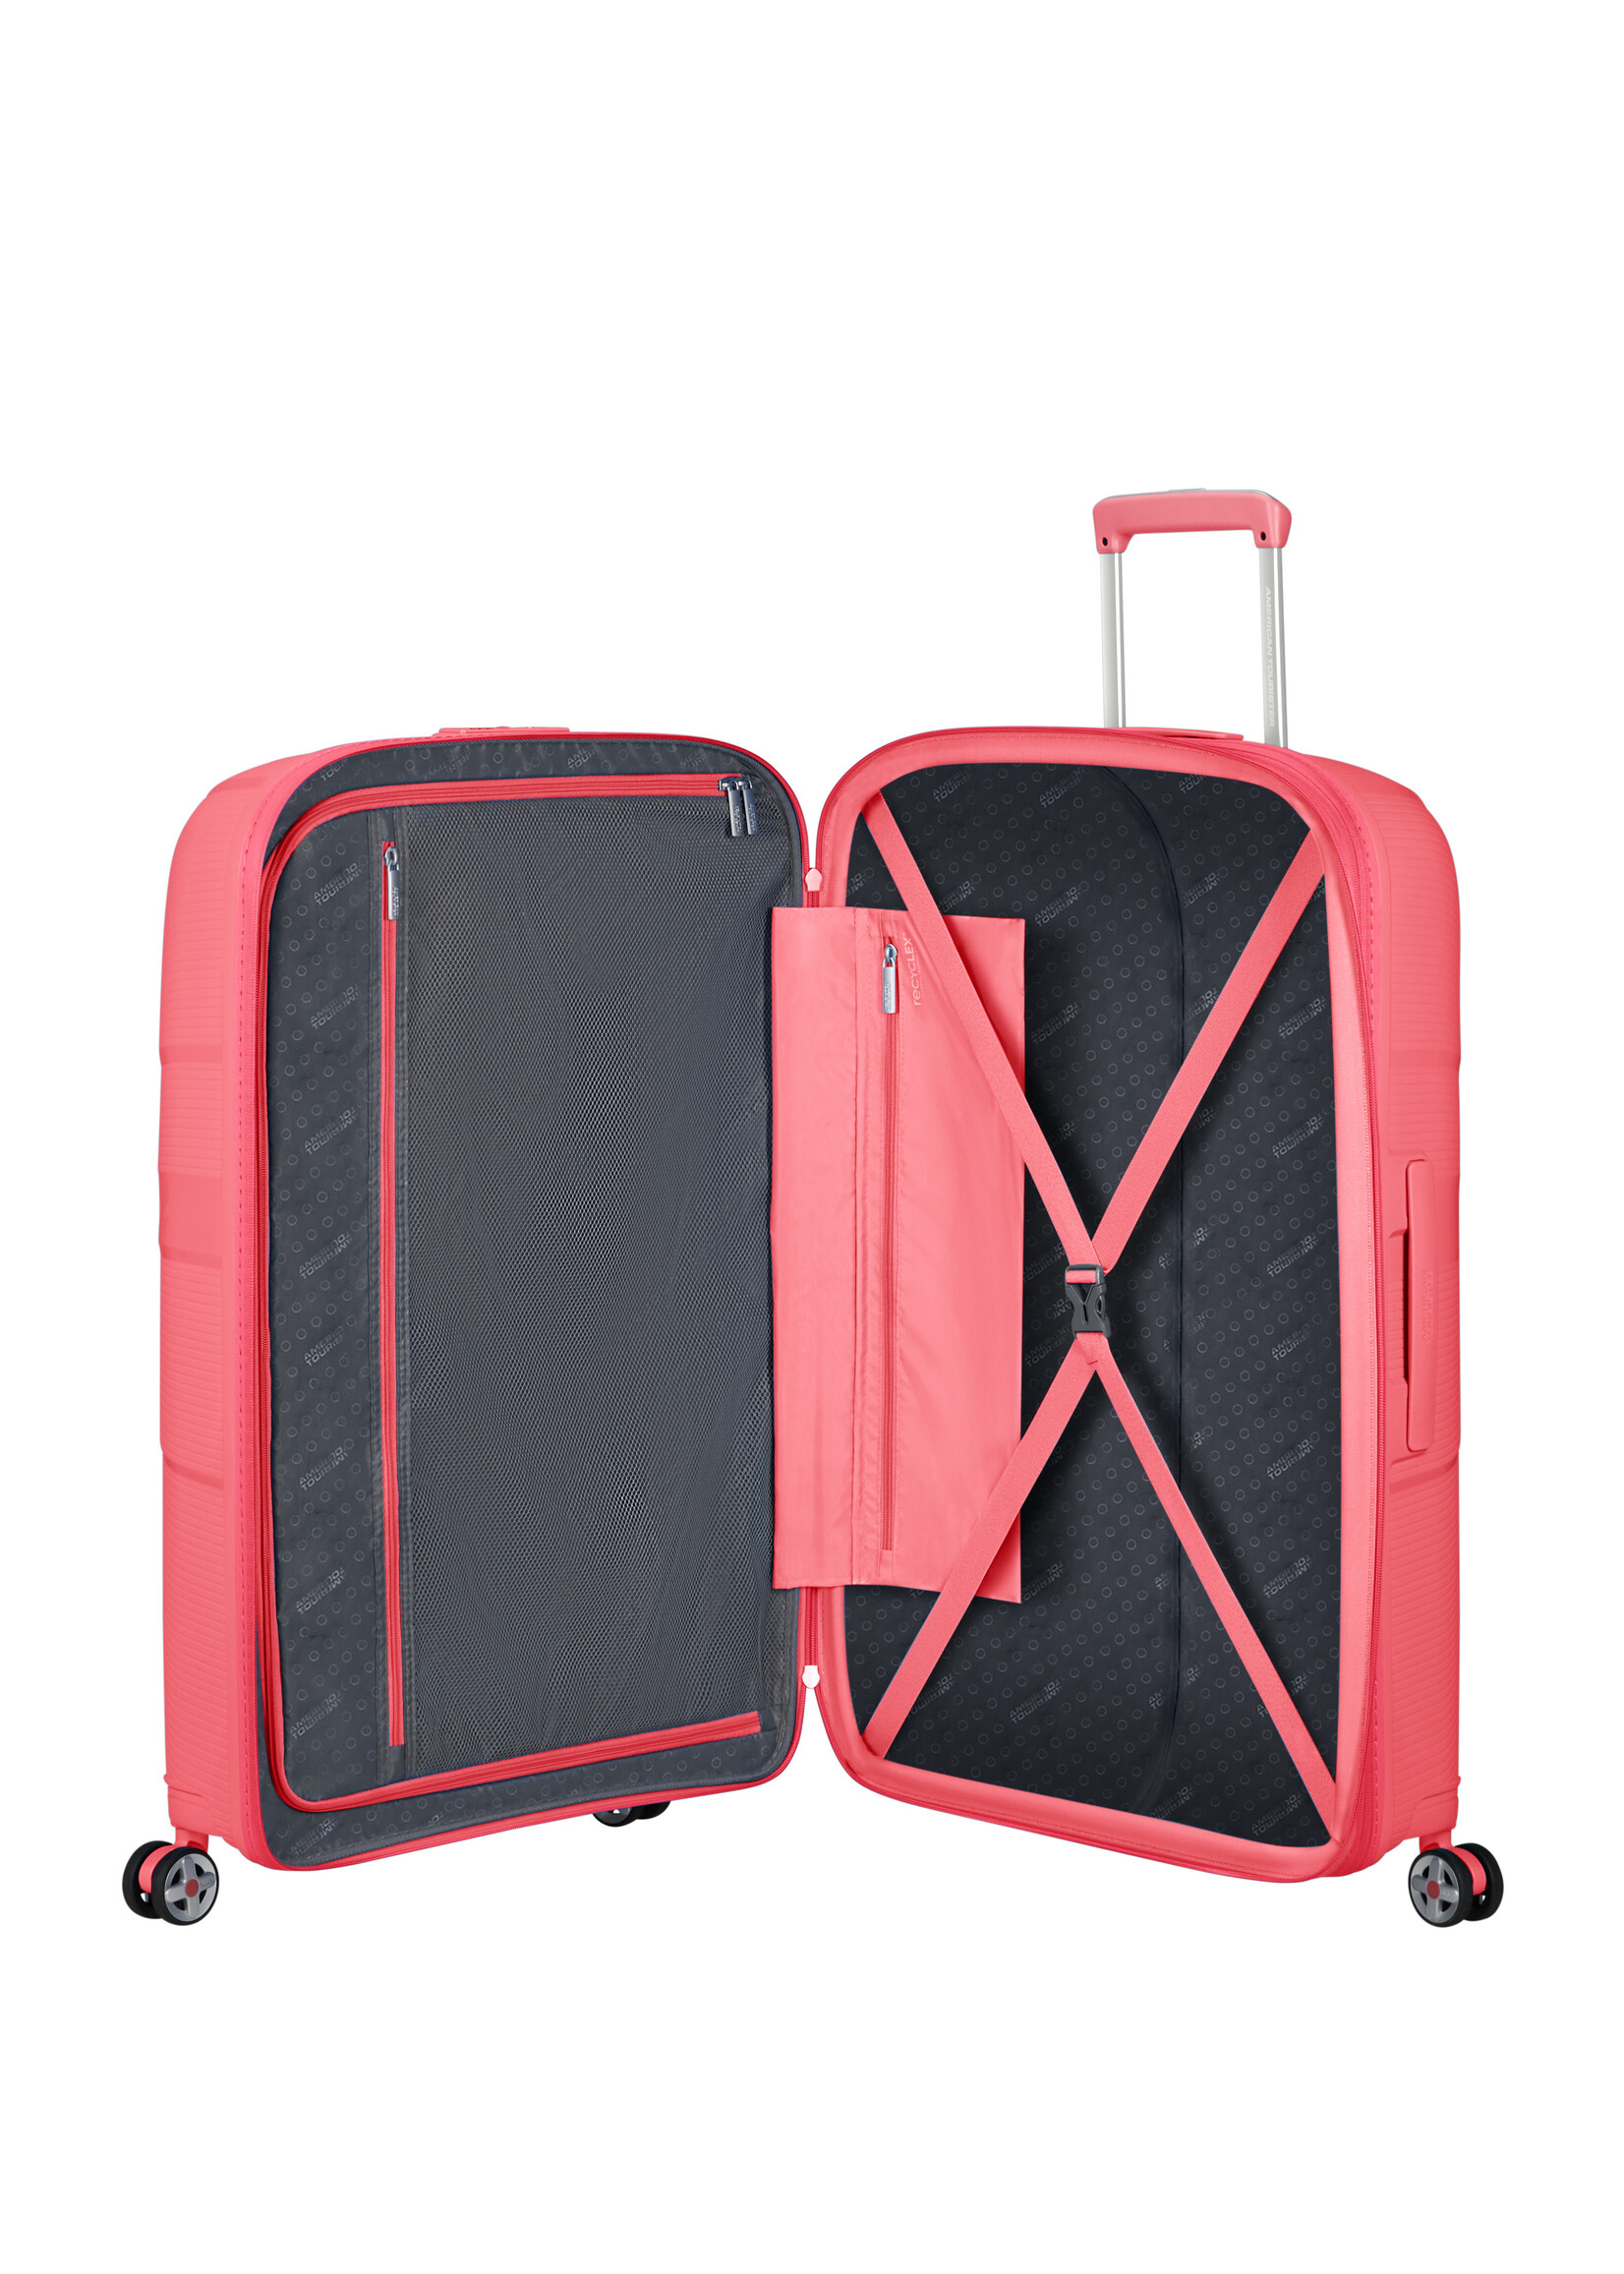 AMERICAN TOURISTER STARVIBE SPINNER 77 EXP SUN KISSED CORAL